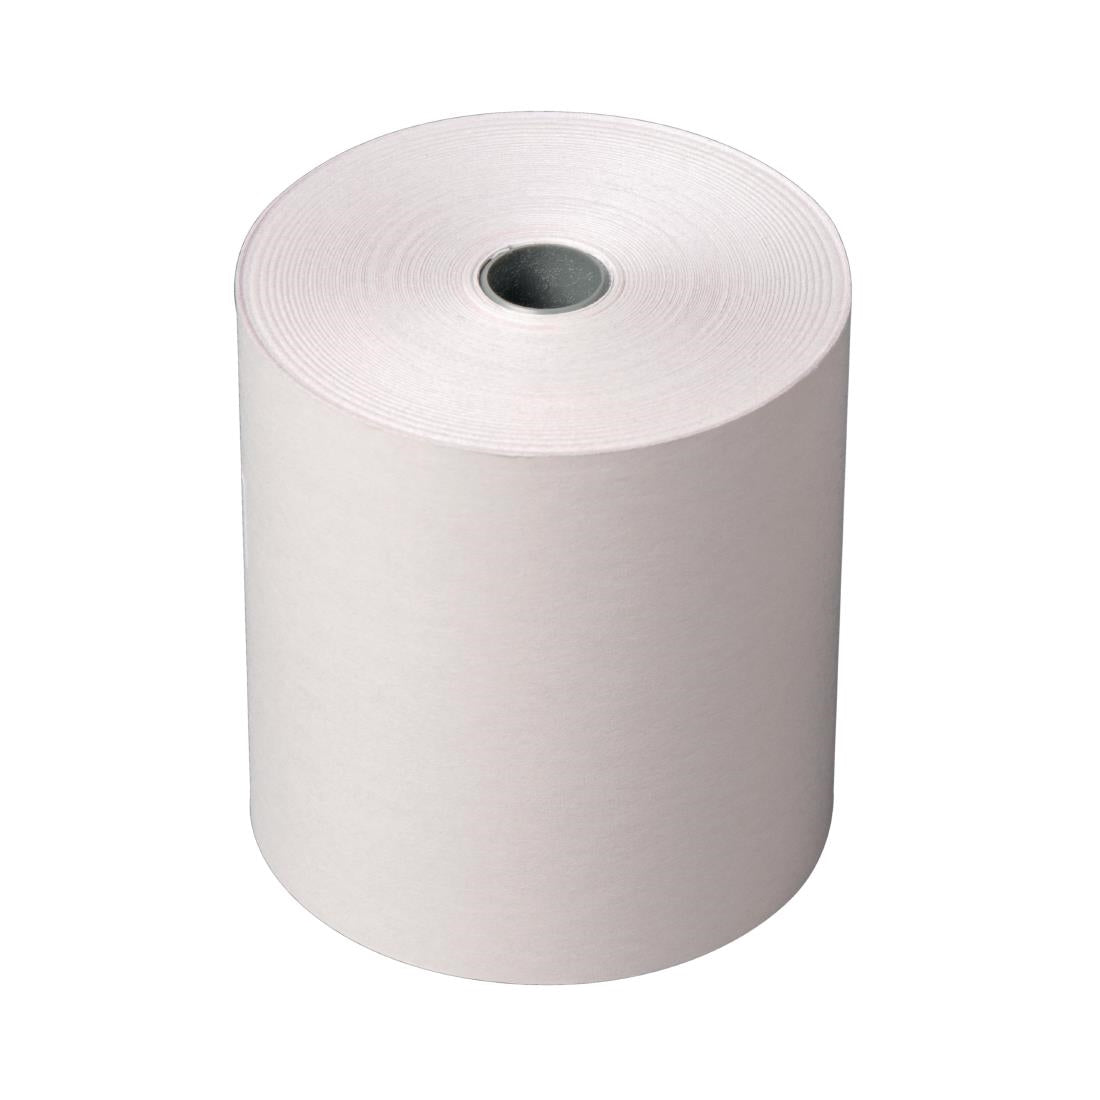 Fiesta Non-Thermal 2ply White and Pink Till Roll 76 x 71mm (Pack of 20) JD Catering Equipment Solutions Ltd